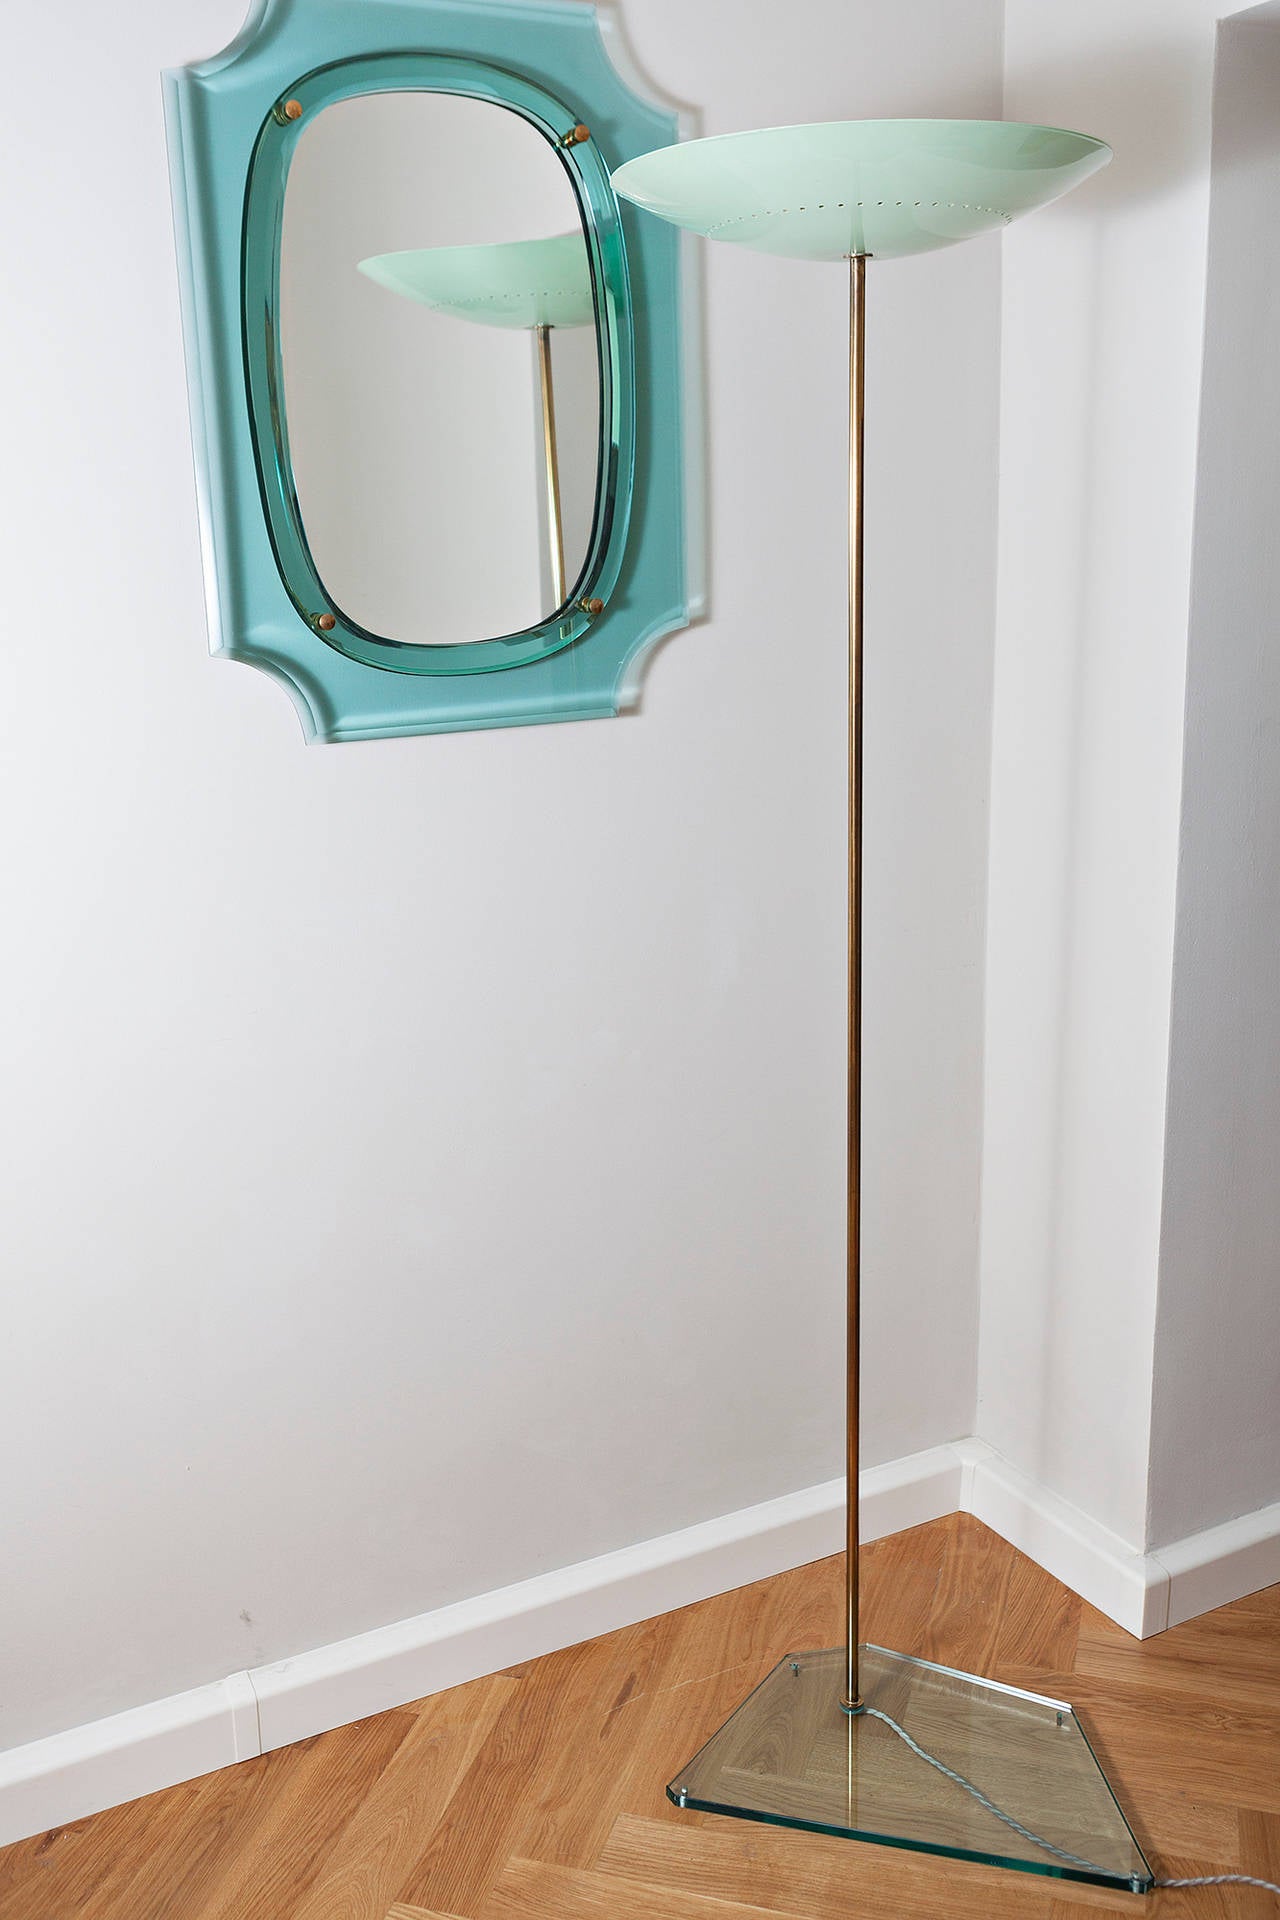 Rare floor Italian floor lamp torchiere Attributed to Stilnovo, Italy, circa 1955,
original lacquered turquoise metal screen
brass rod, thick glass base, five ceiling Spotlights
Dimensions: height 183 cm, base 30 x 38 x 55 cm, diameter of the